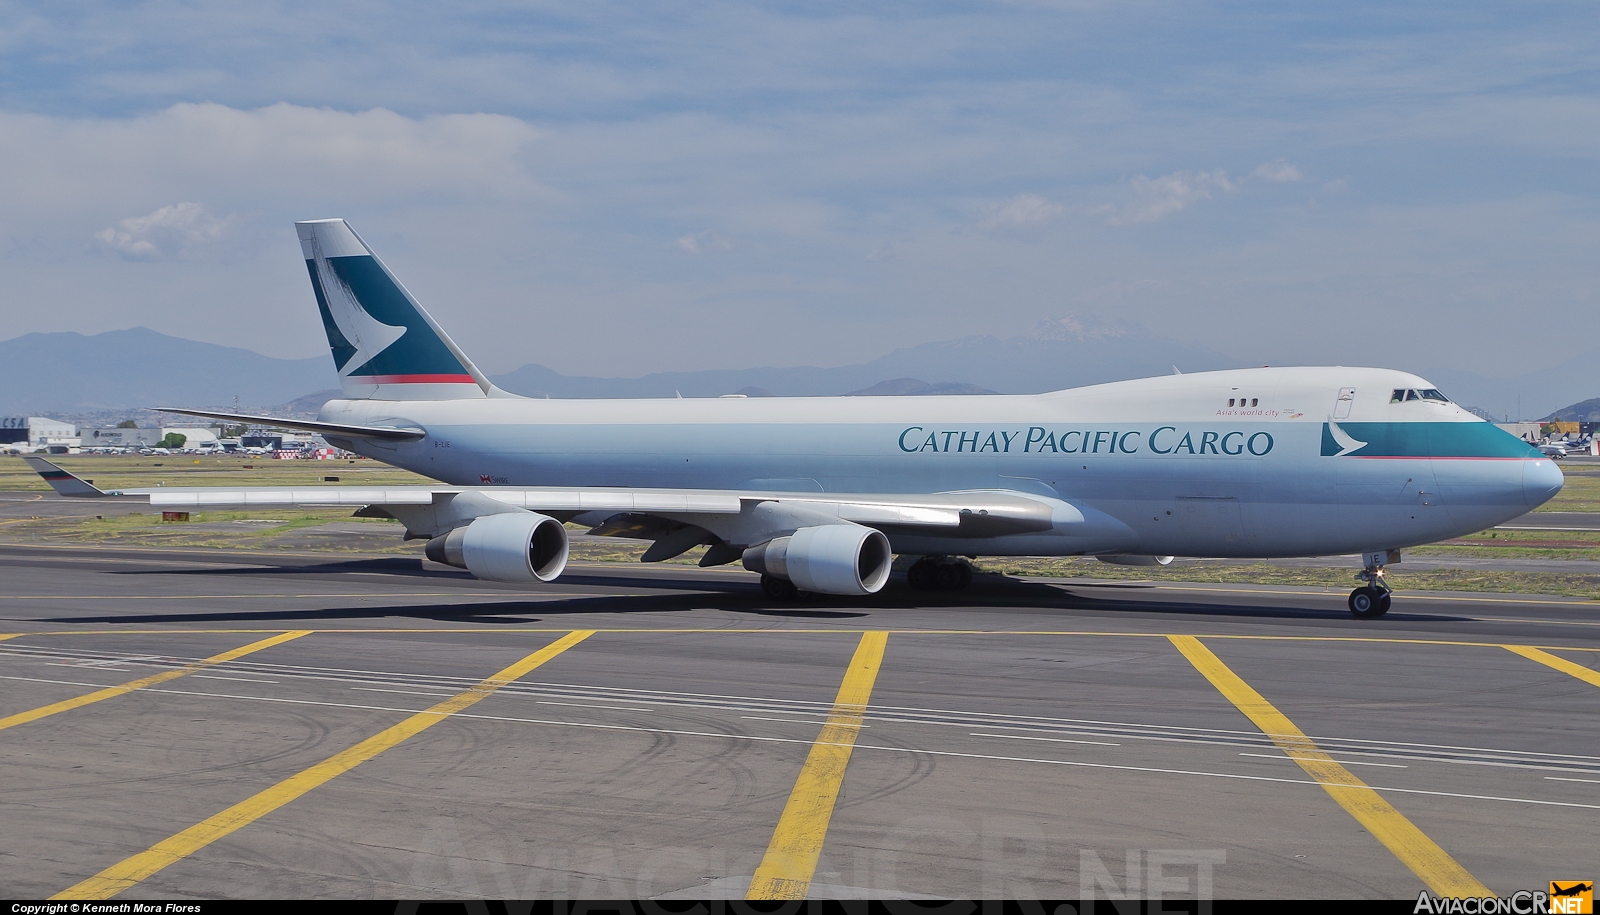 B-LIE - Boeing 747-467ERF - Cathay Pacific Cargo